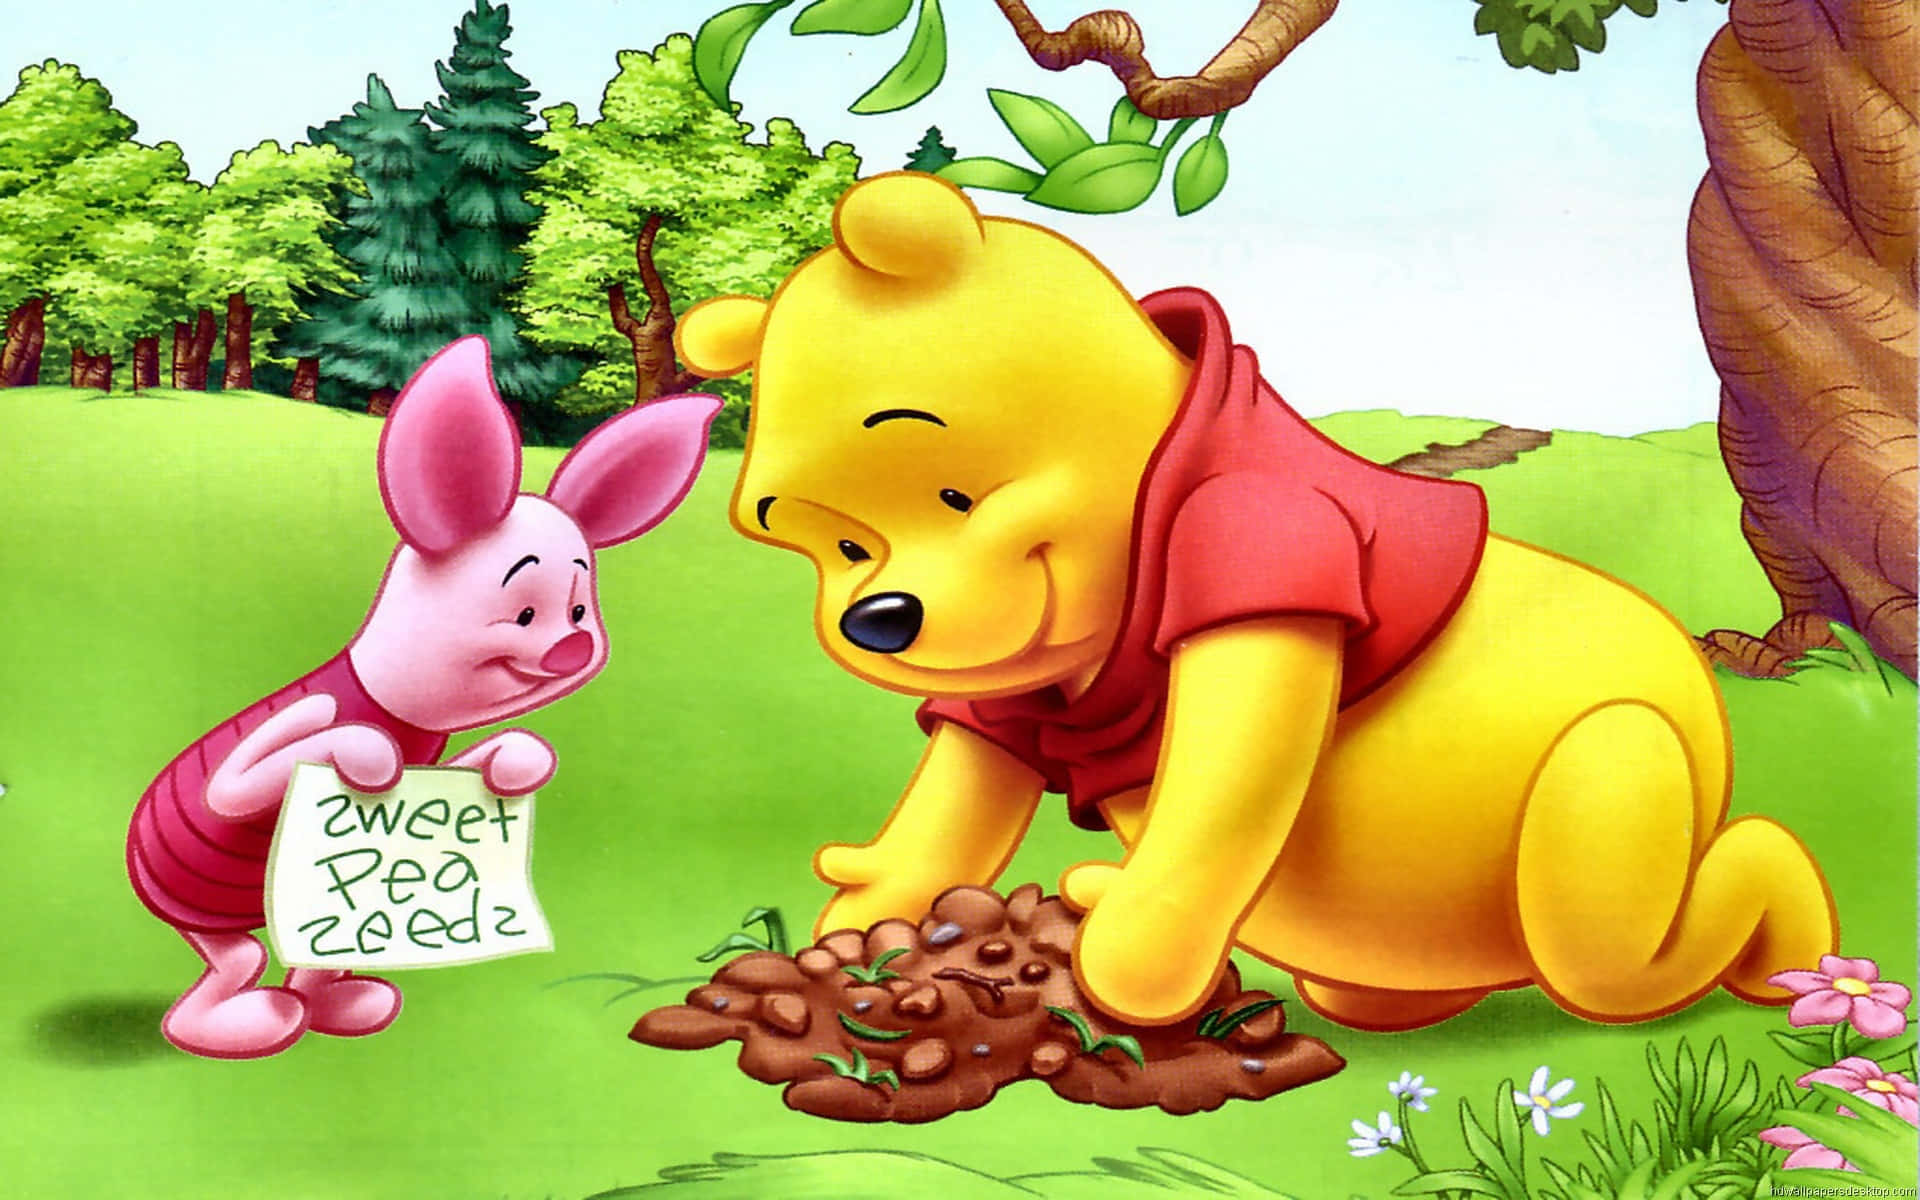 “cuddling With Winnie The Pooh” Background